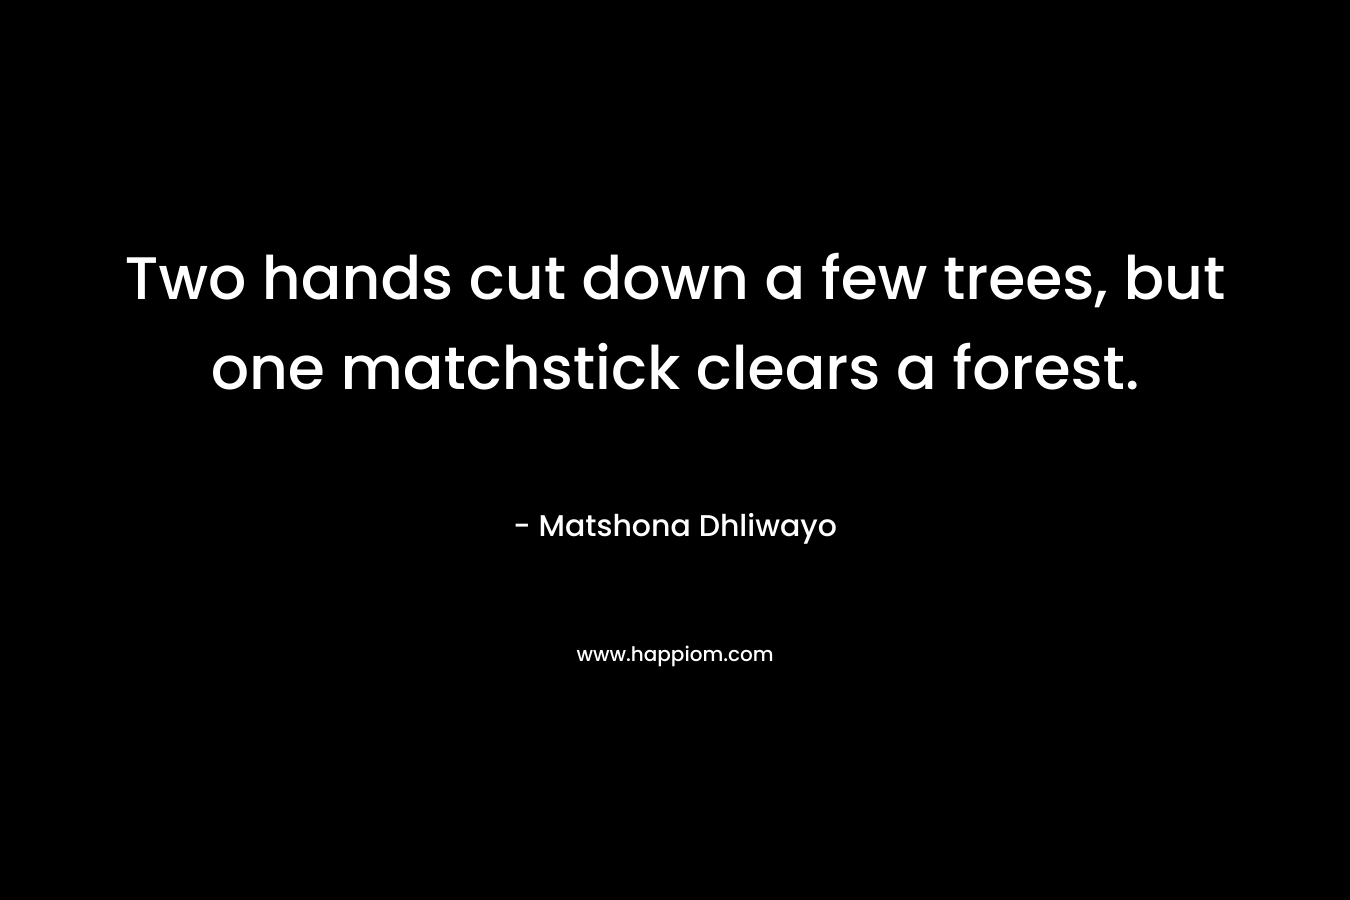 Two hands cut down a few trees, but one matchstick clears a forest.